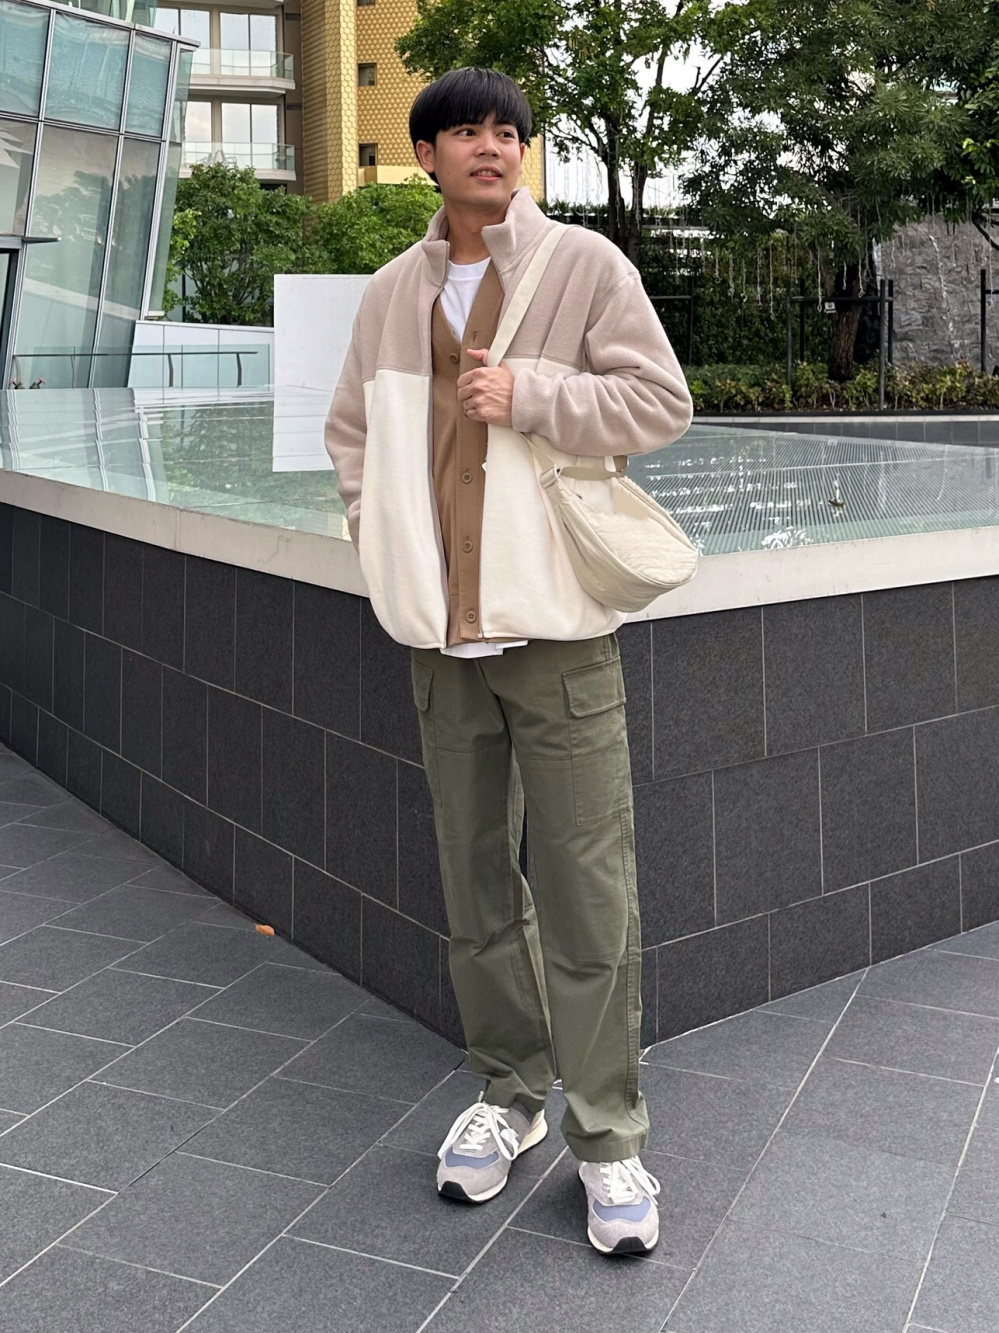 Check styling ideas for「Cargo Jogger Pants」